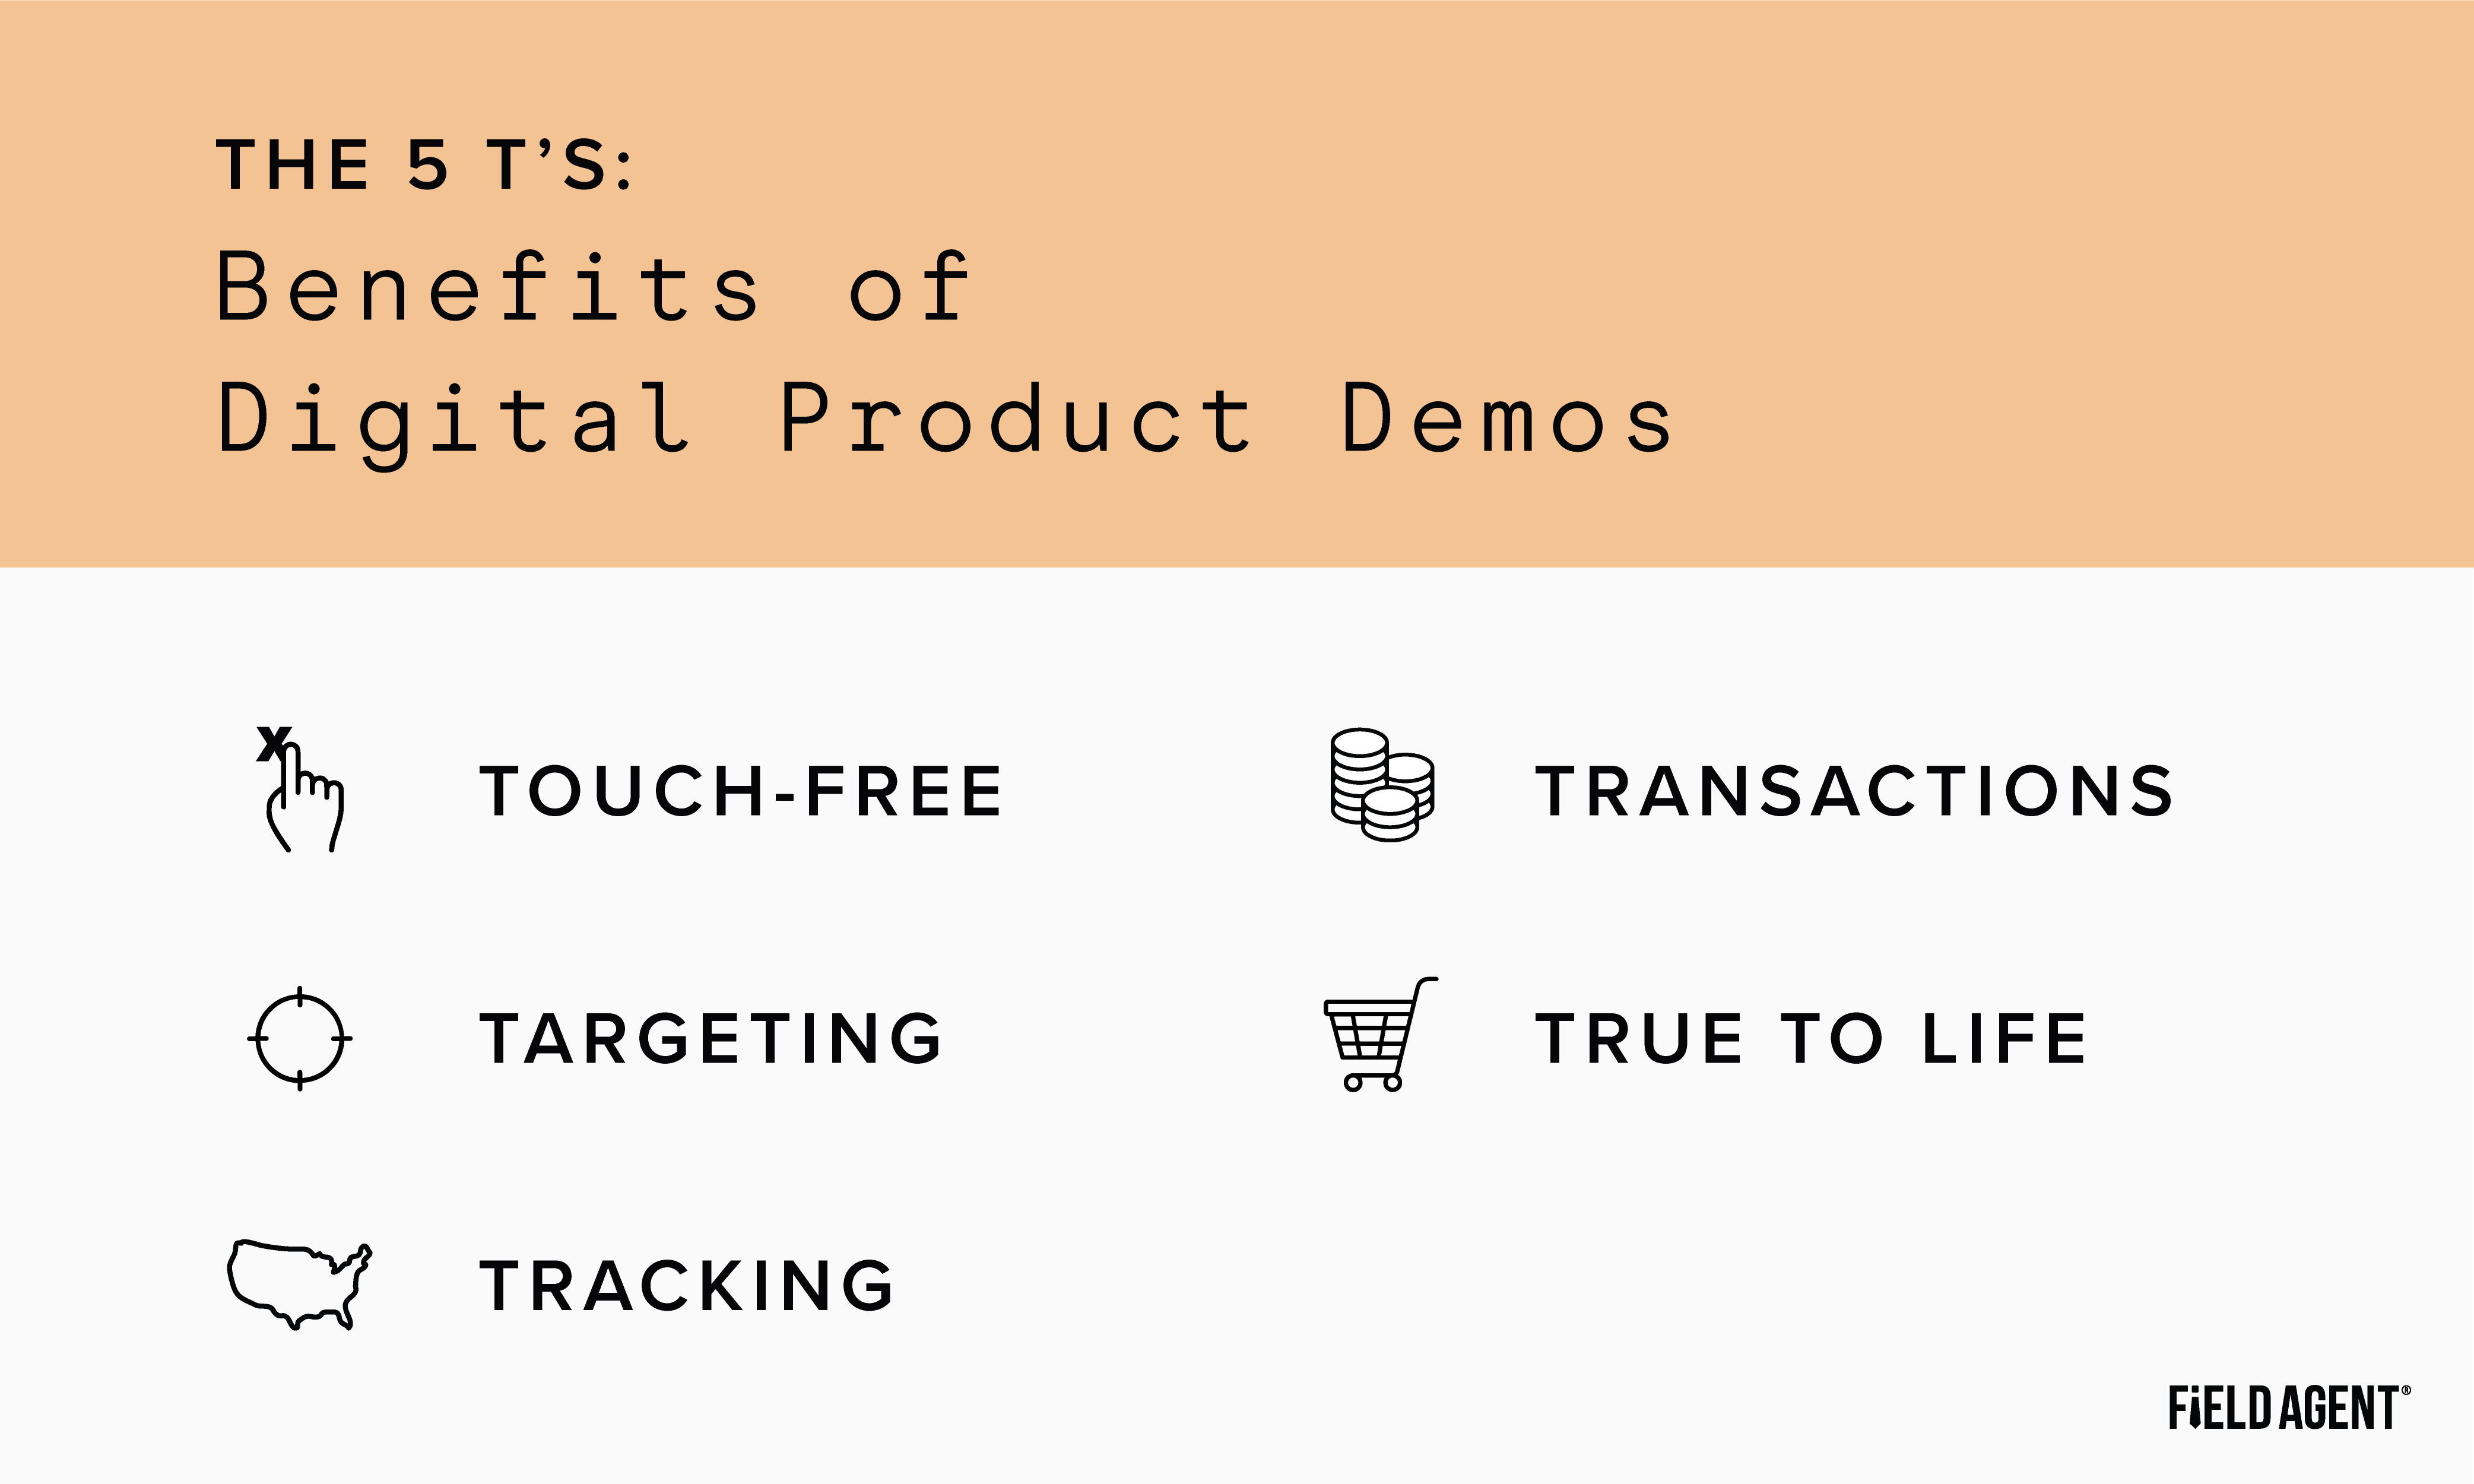 The benefits of digital product demos and sampling include the 5 Ts: touch-free, targeting, tracking, transactions, and true to life